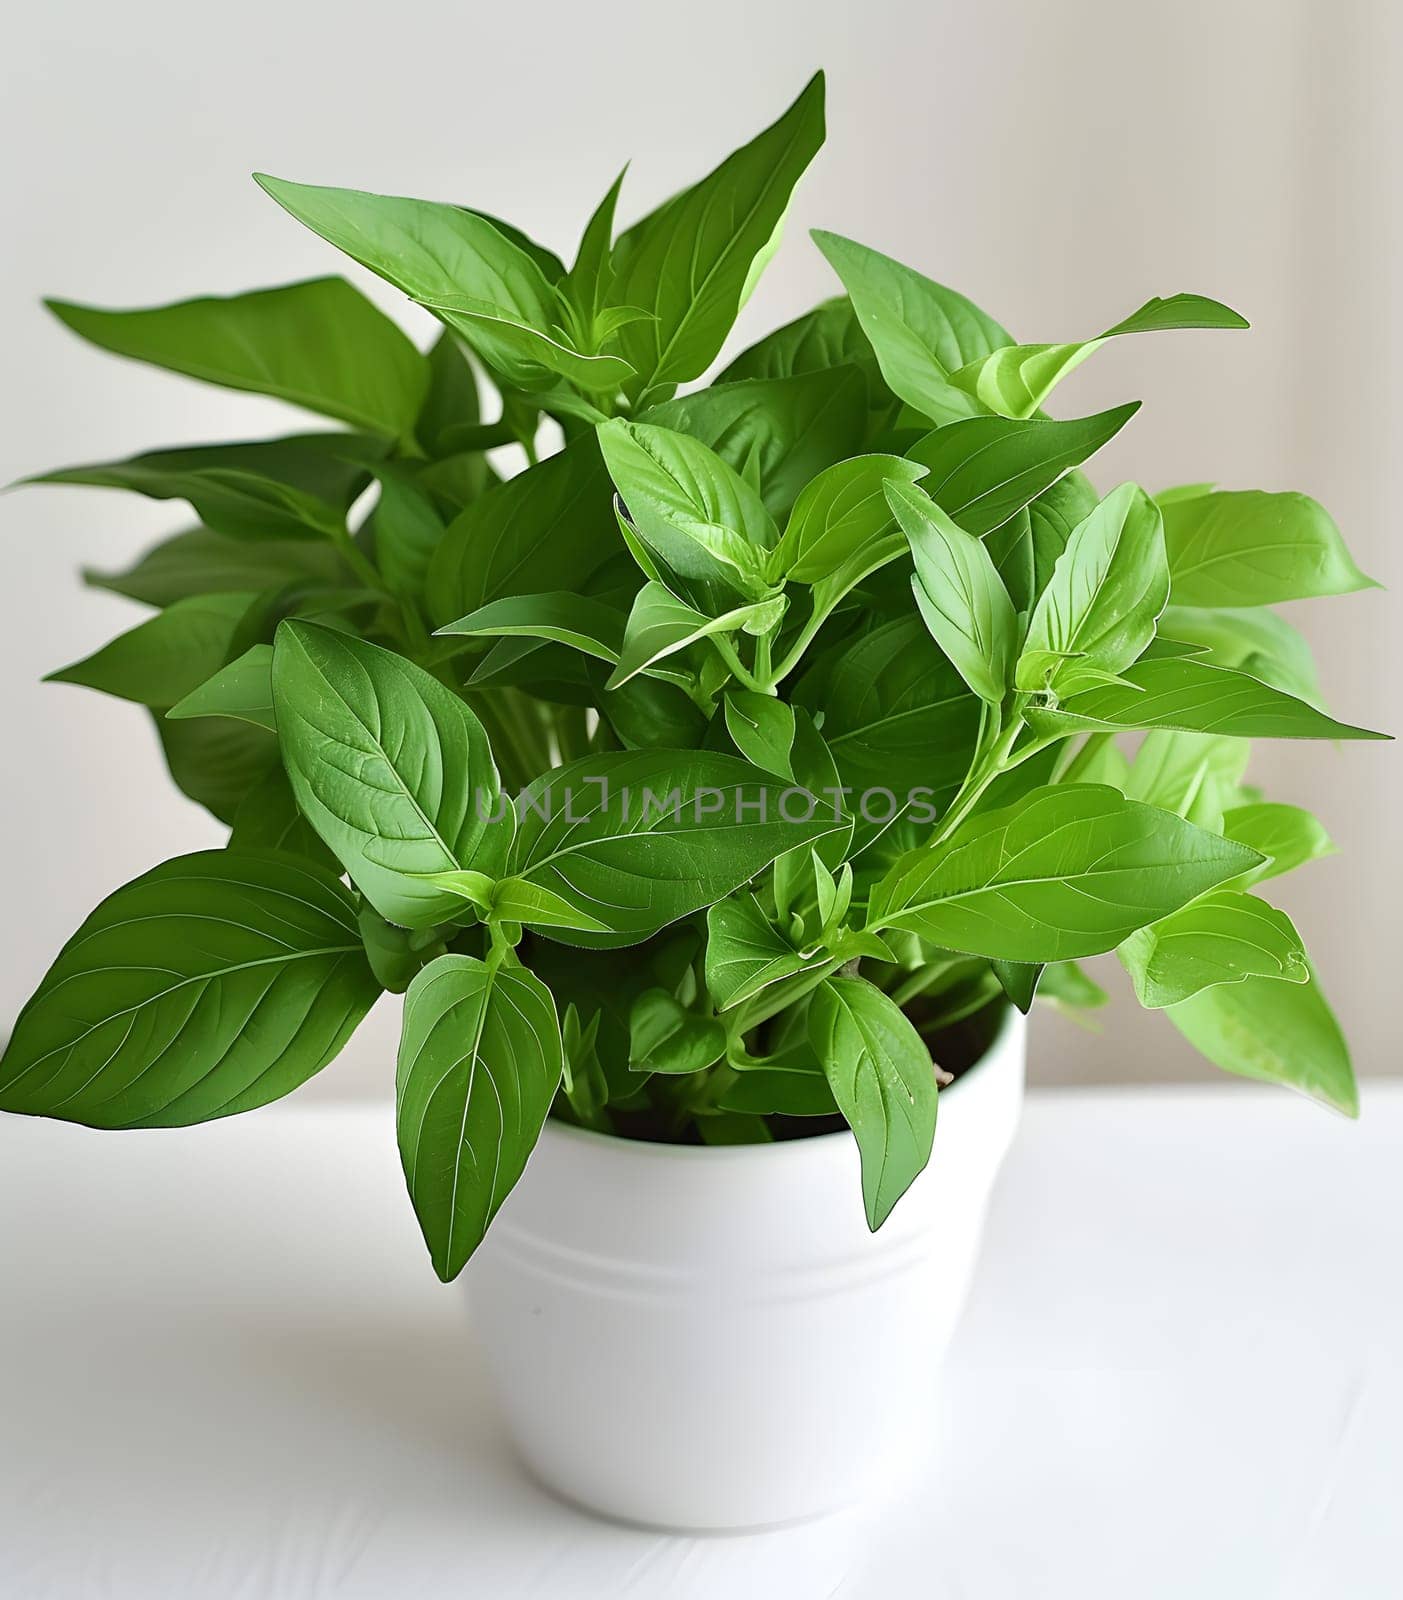 A houseplant with green leaves sits in a flowerpot on a table by Nadtochiy